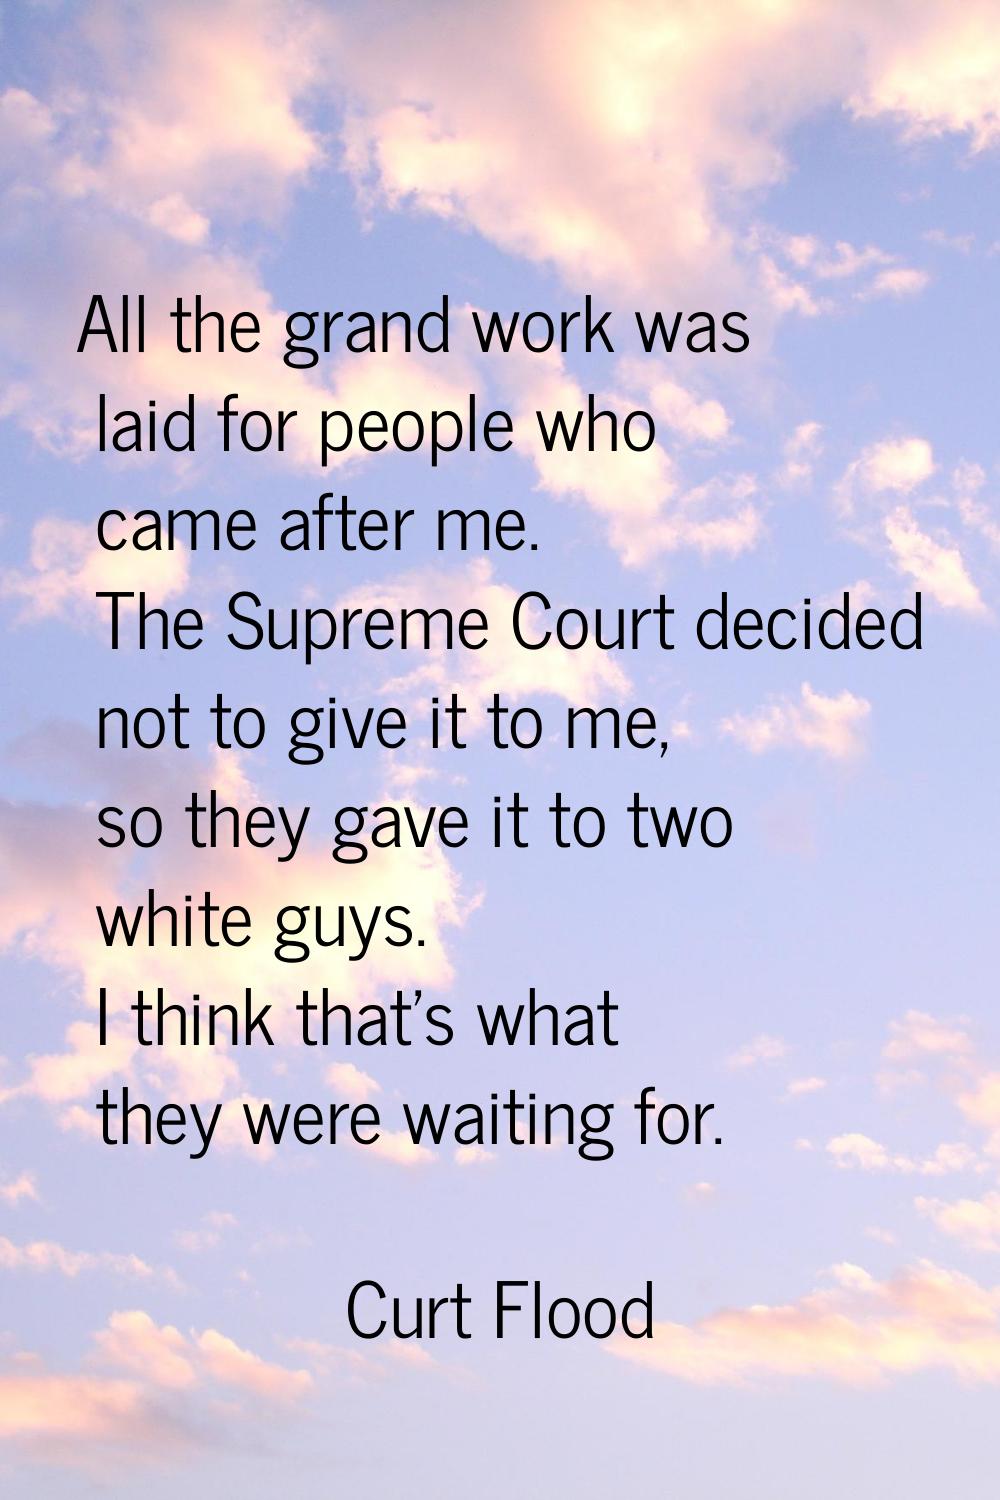 All the grand work was laid for people who came after me. The Supreme Court decided not to give it 